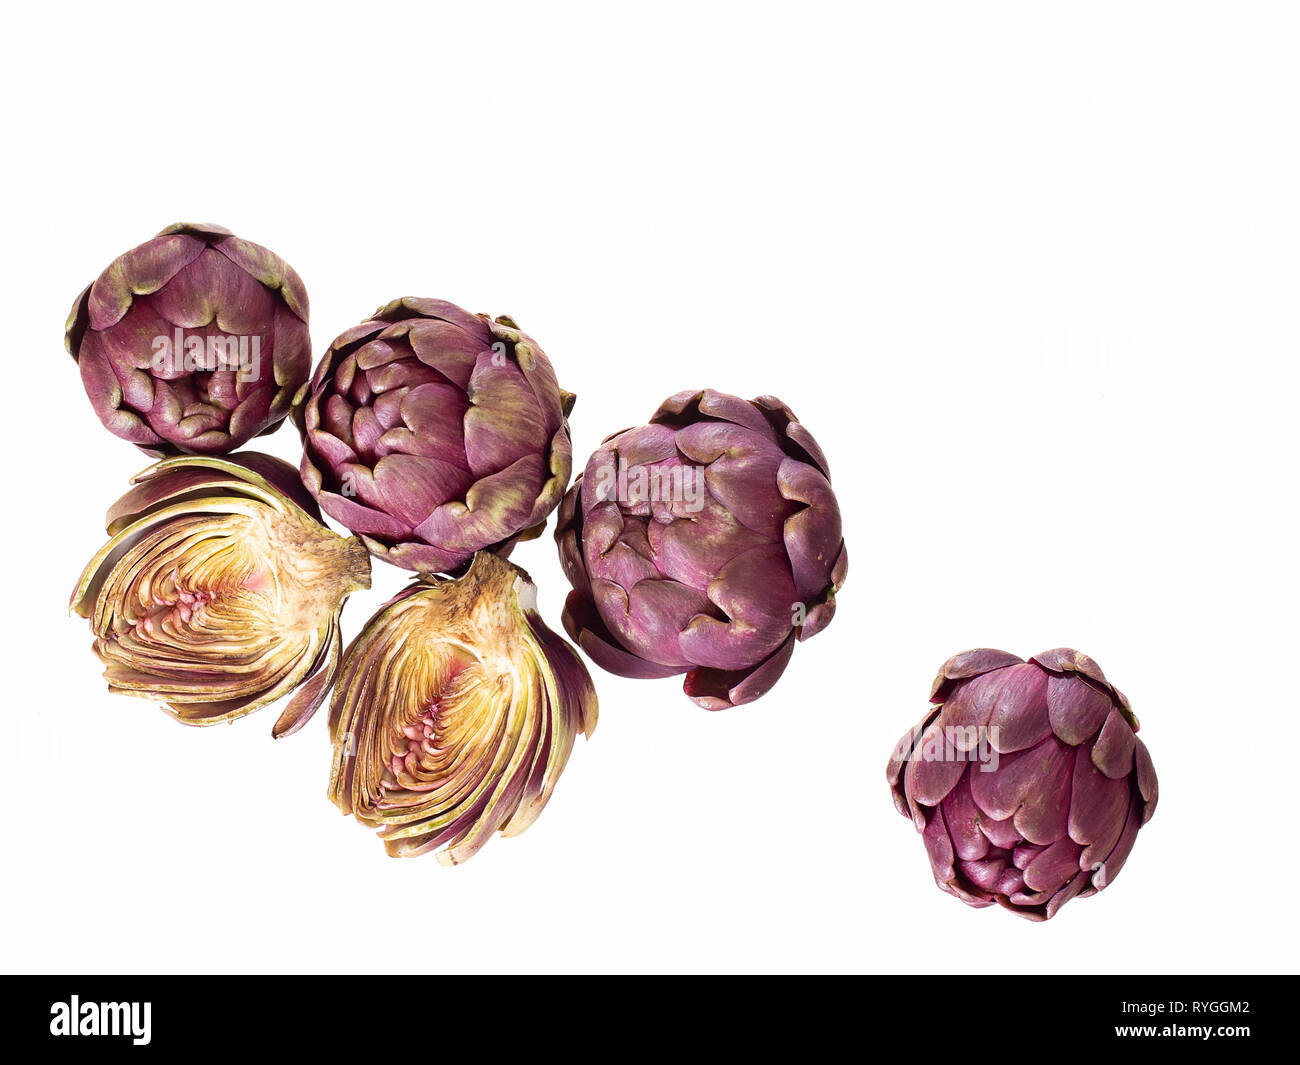 Raw artichokes, Mediterranean vegetable, uncooked and cut open, isolated on white. Stock Photo